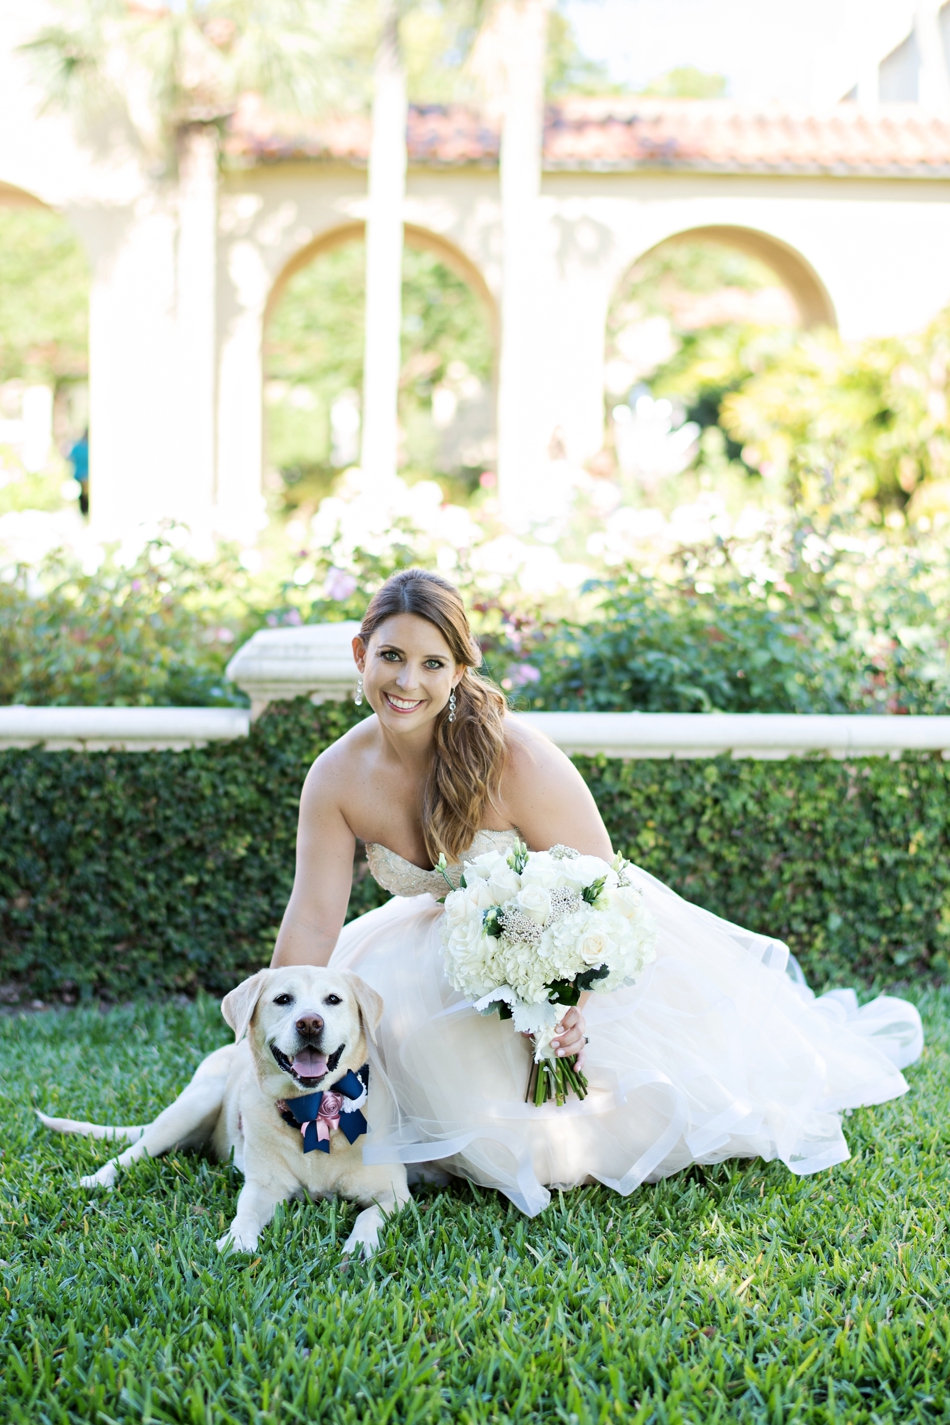 I love dogs and weddings 